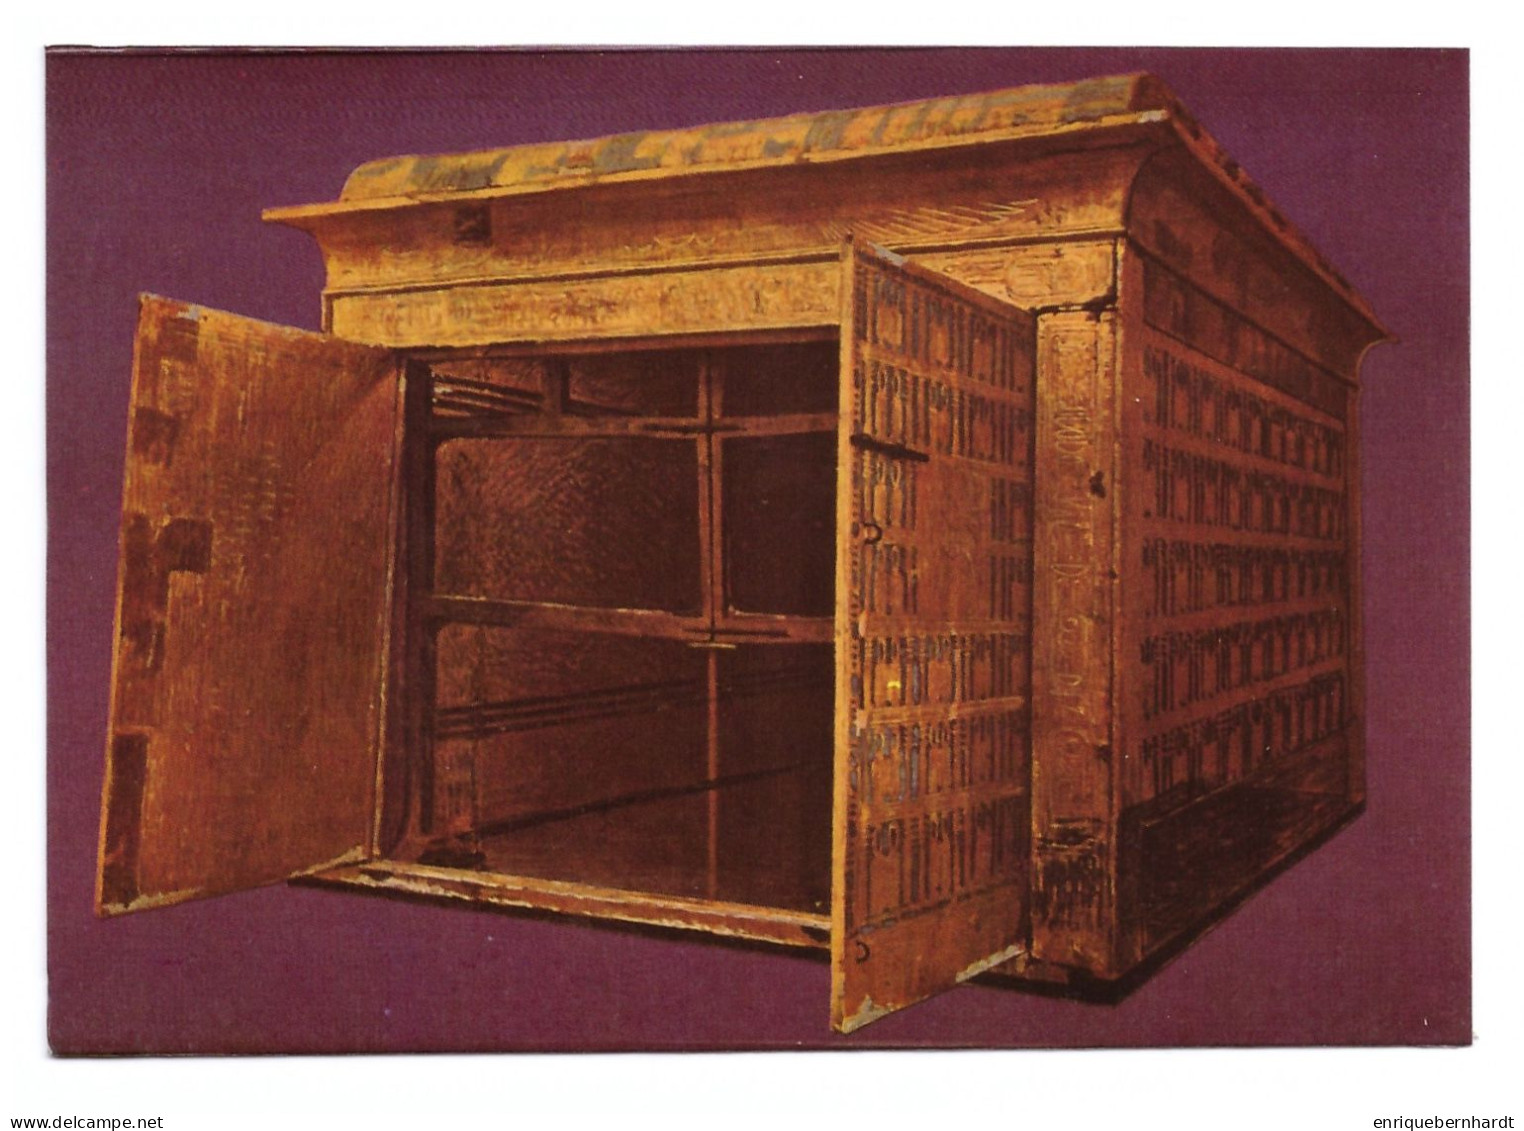 EGYPT // TUTANKHAMEN'S TREASURES - THE FIRST GREAT SHRINE OF WOOD COVERED WITH GILT STUCCO - Museen